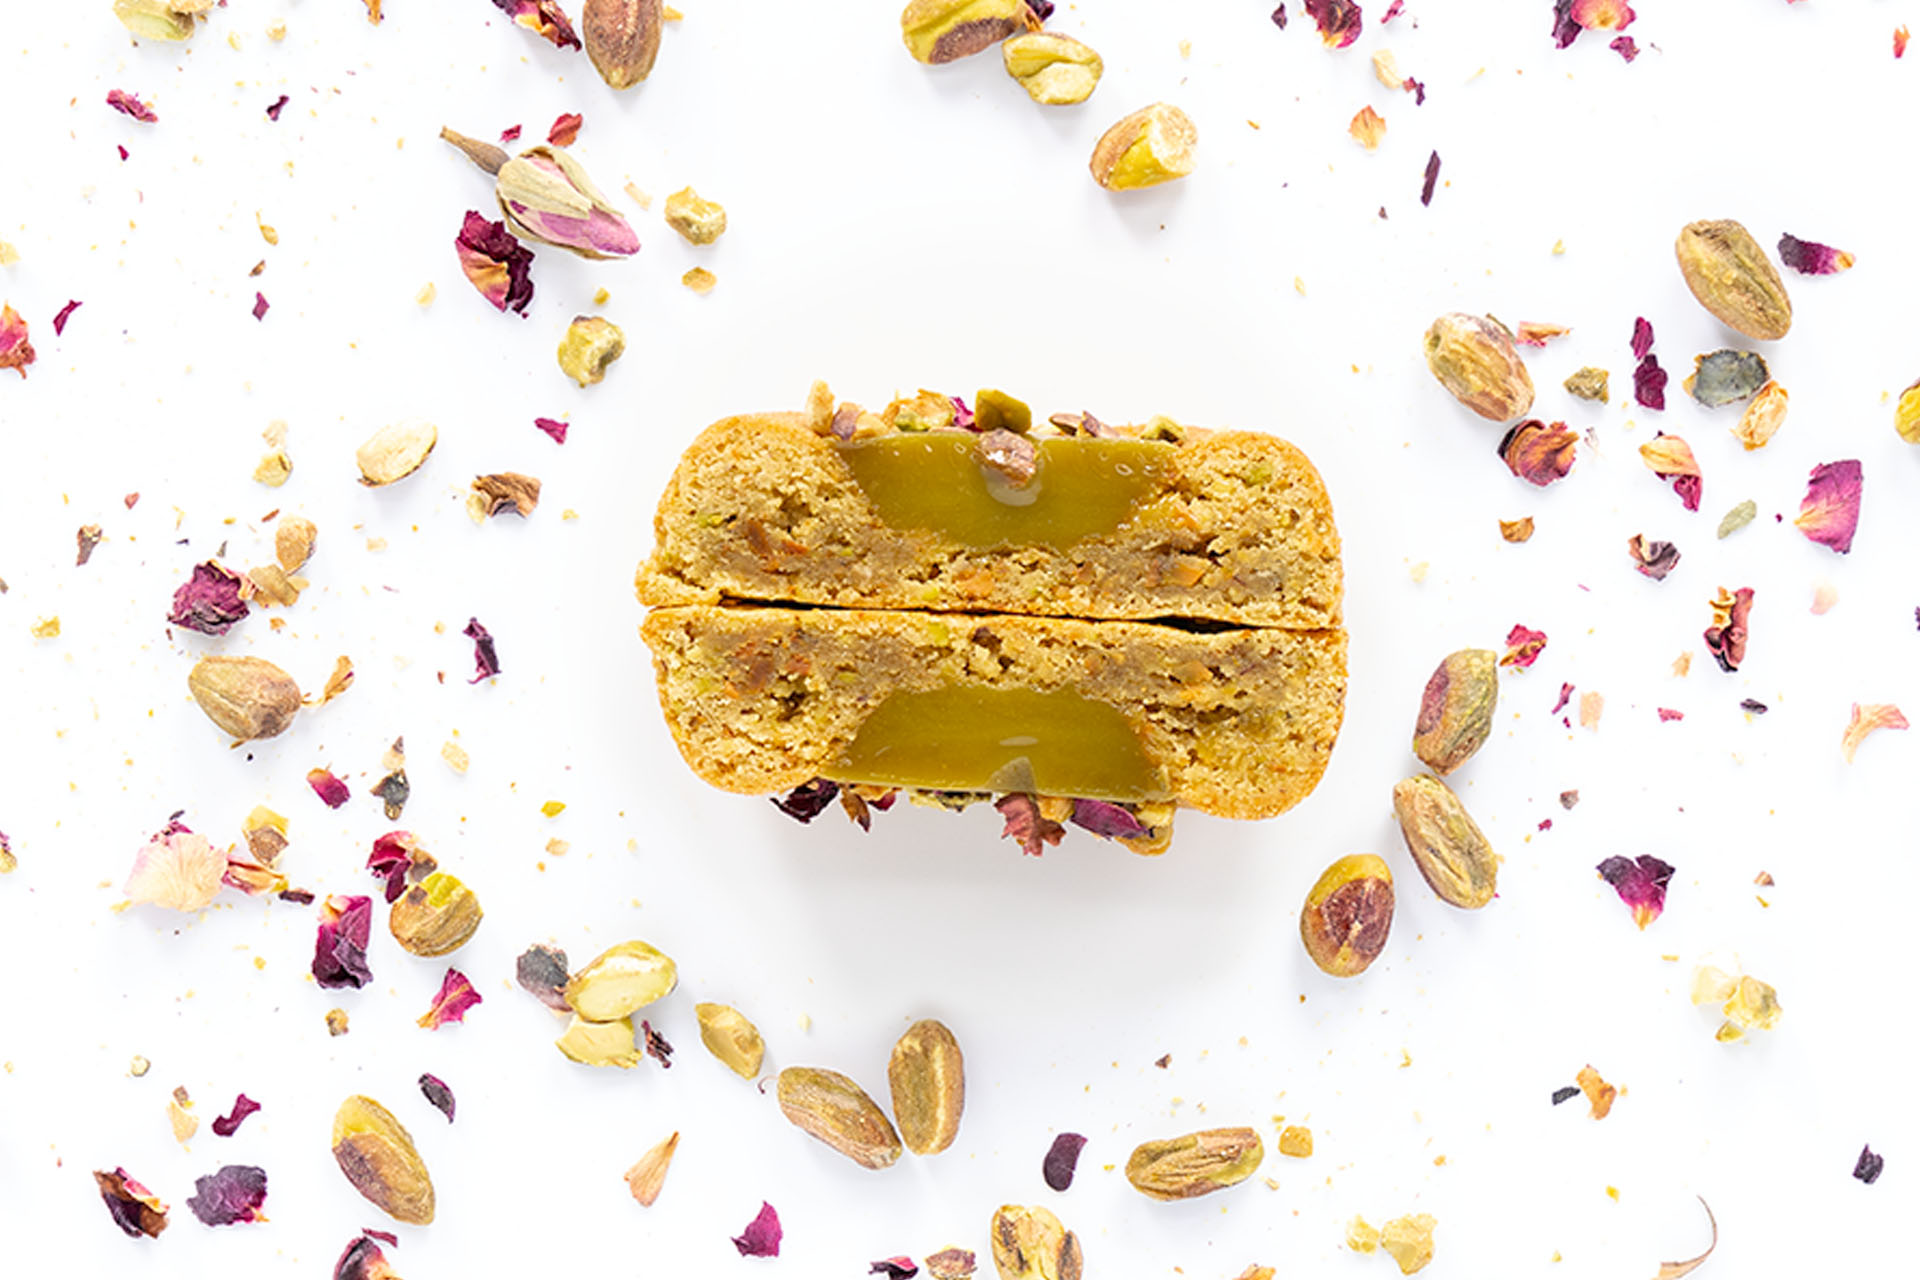 A pistachio macaron with a creamy filling, surrounded by scattered pistachio nuts, espresso beans, and rose petals on a white background.